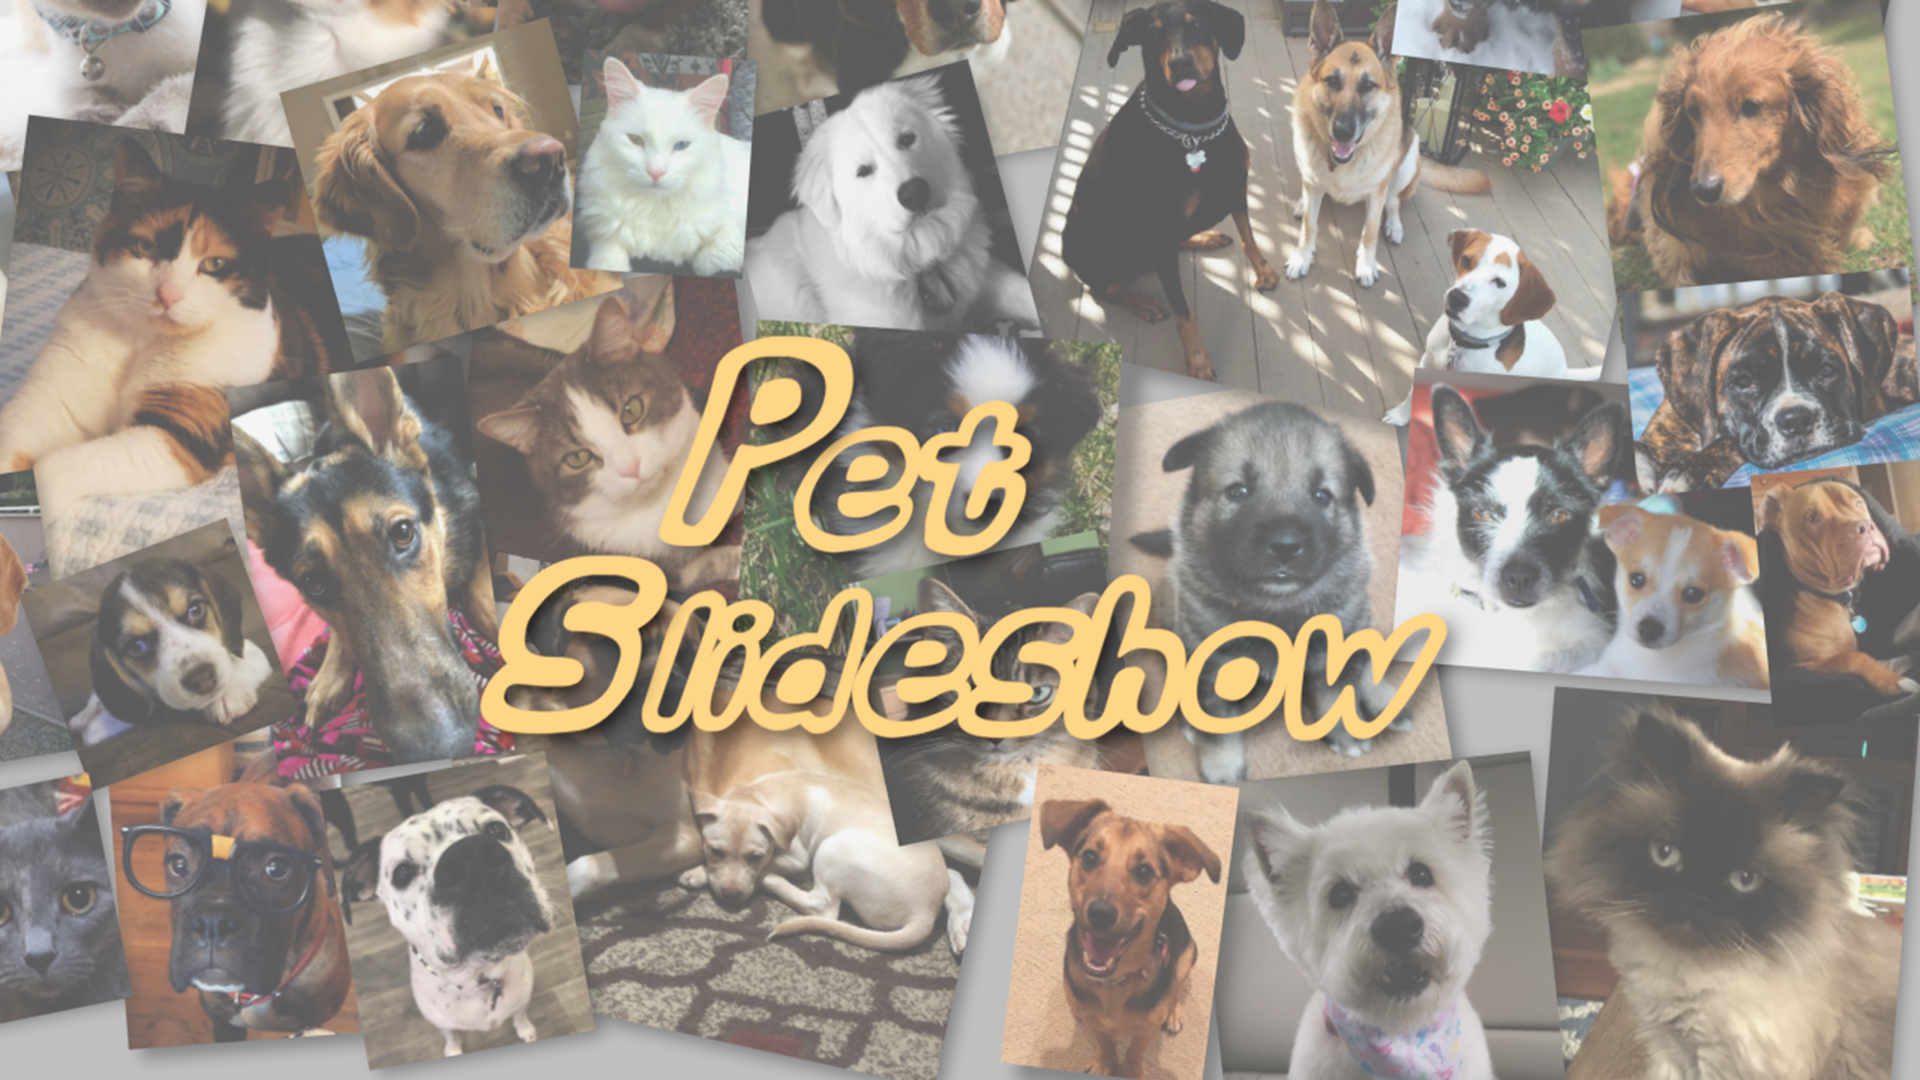 Here are just a few of the adorable pet photos shared with us by viewers. See more photos in the Pet Slideshow below.